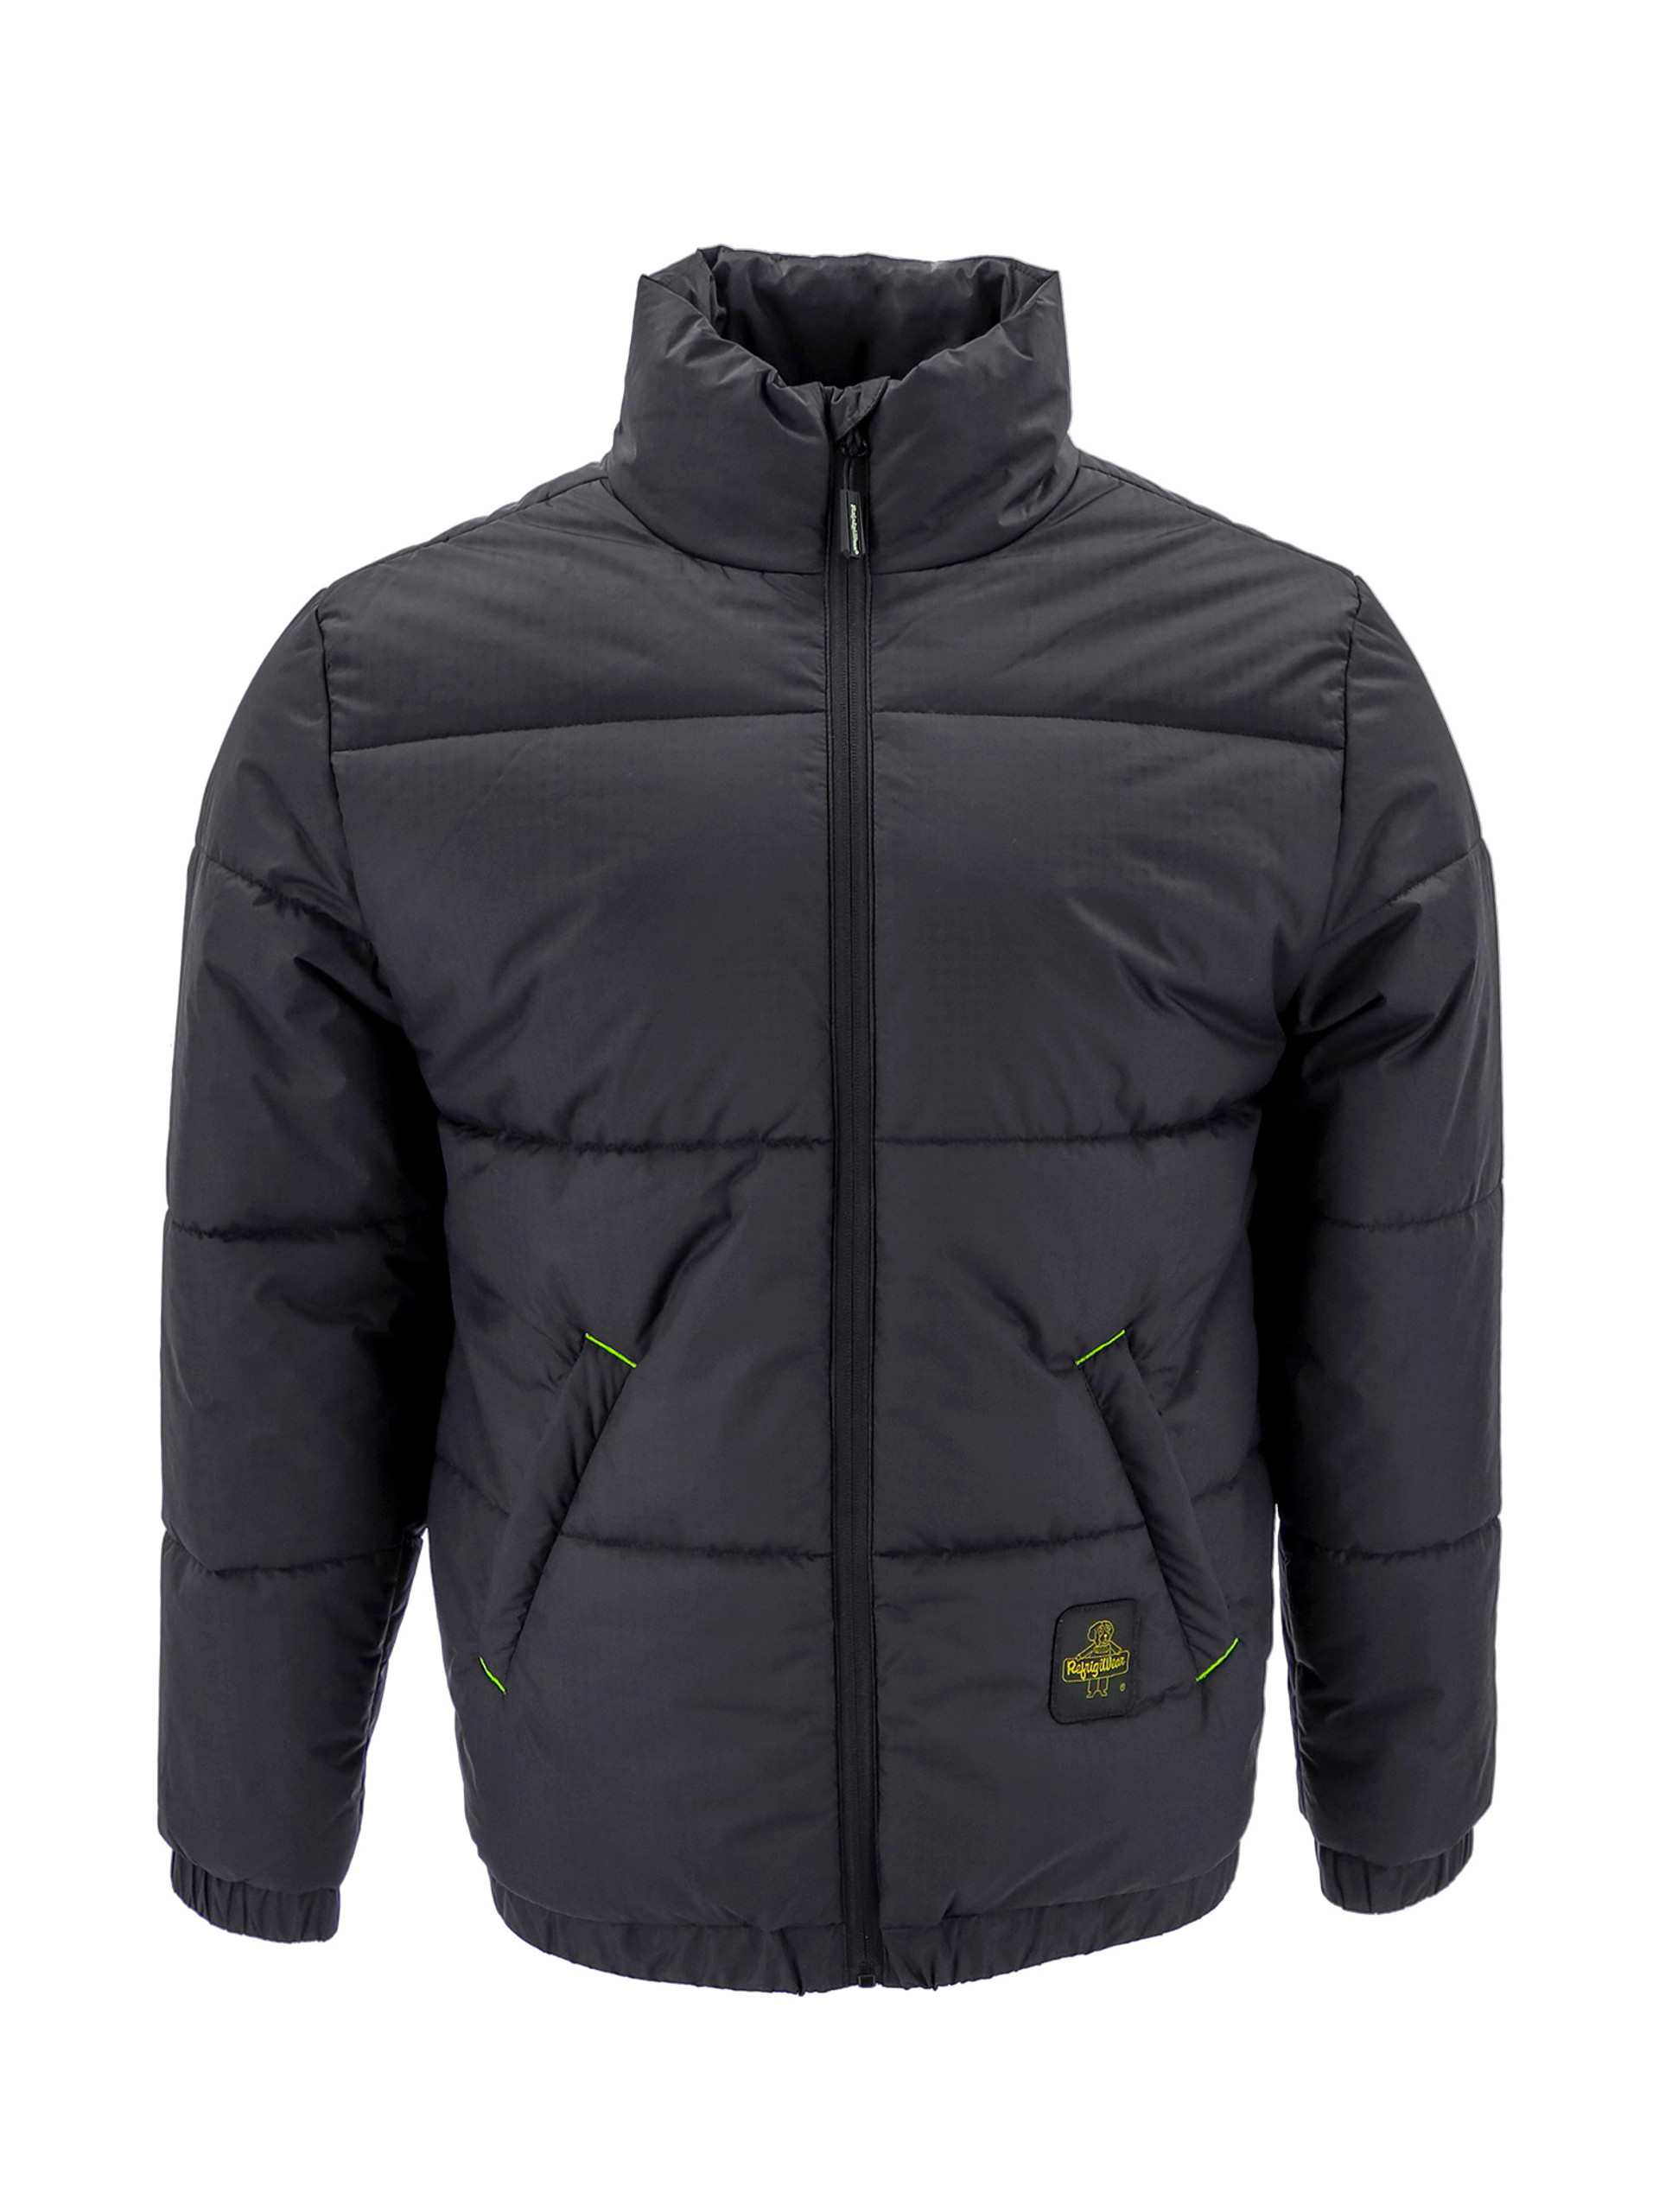 Choosing the Right Puffer Jacket